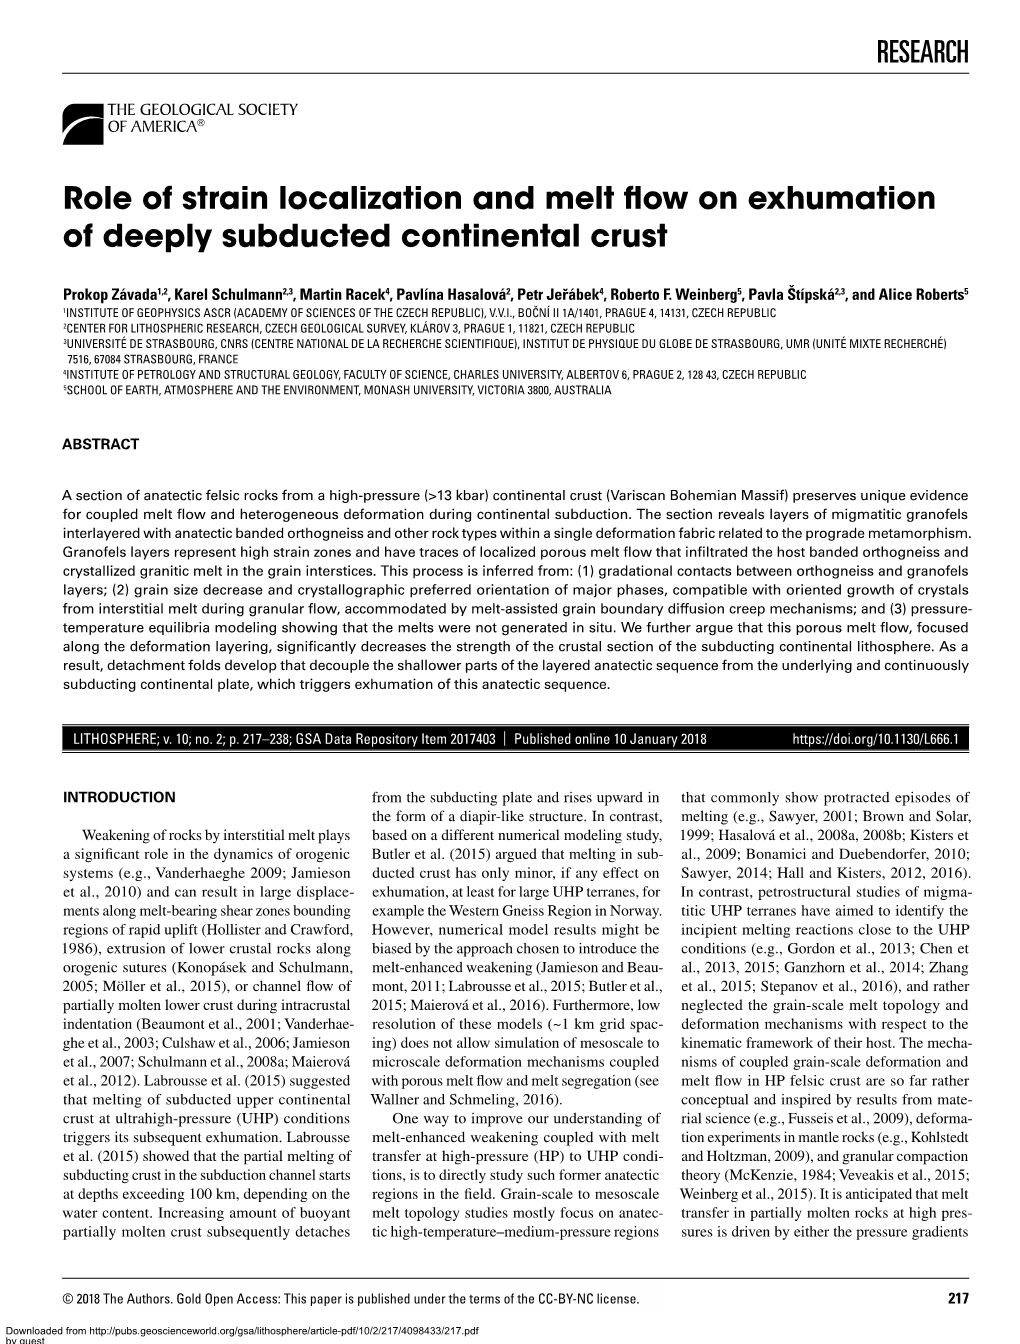 RESEARCH Role of Strain Localization and Melt Flow on Exhumation Of